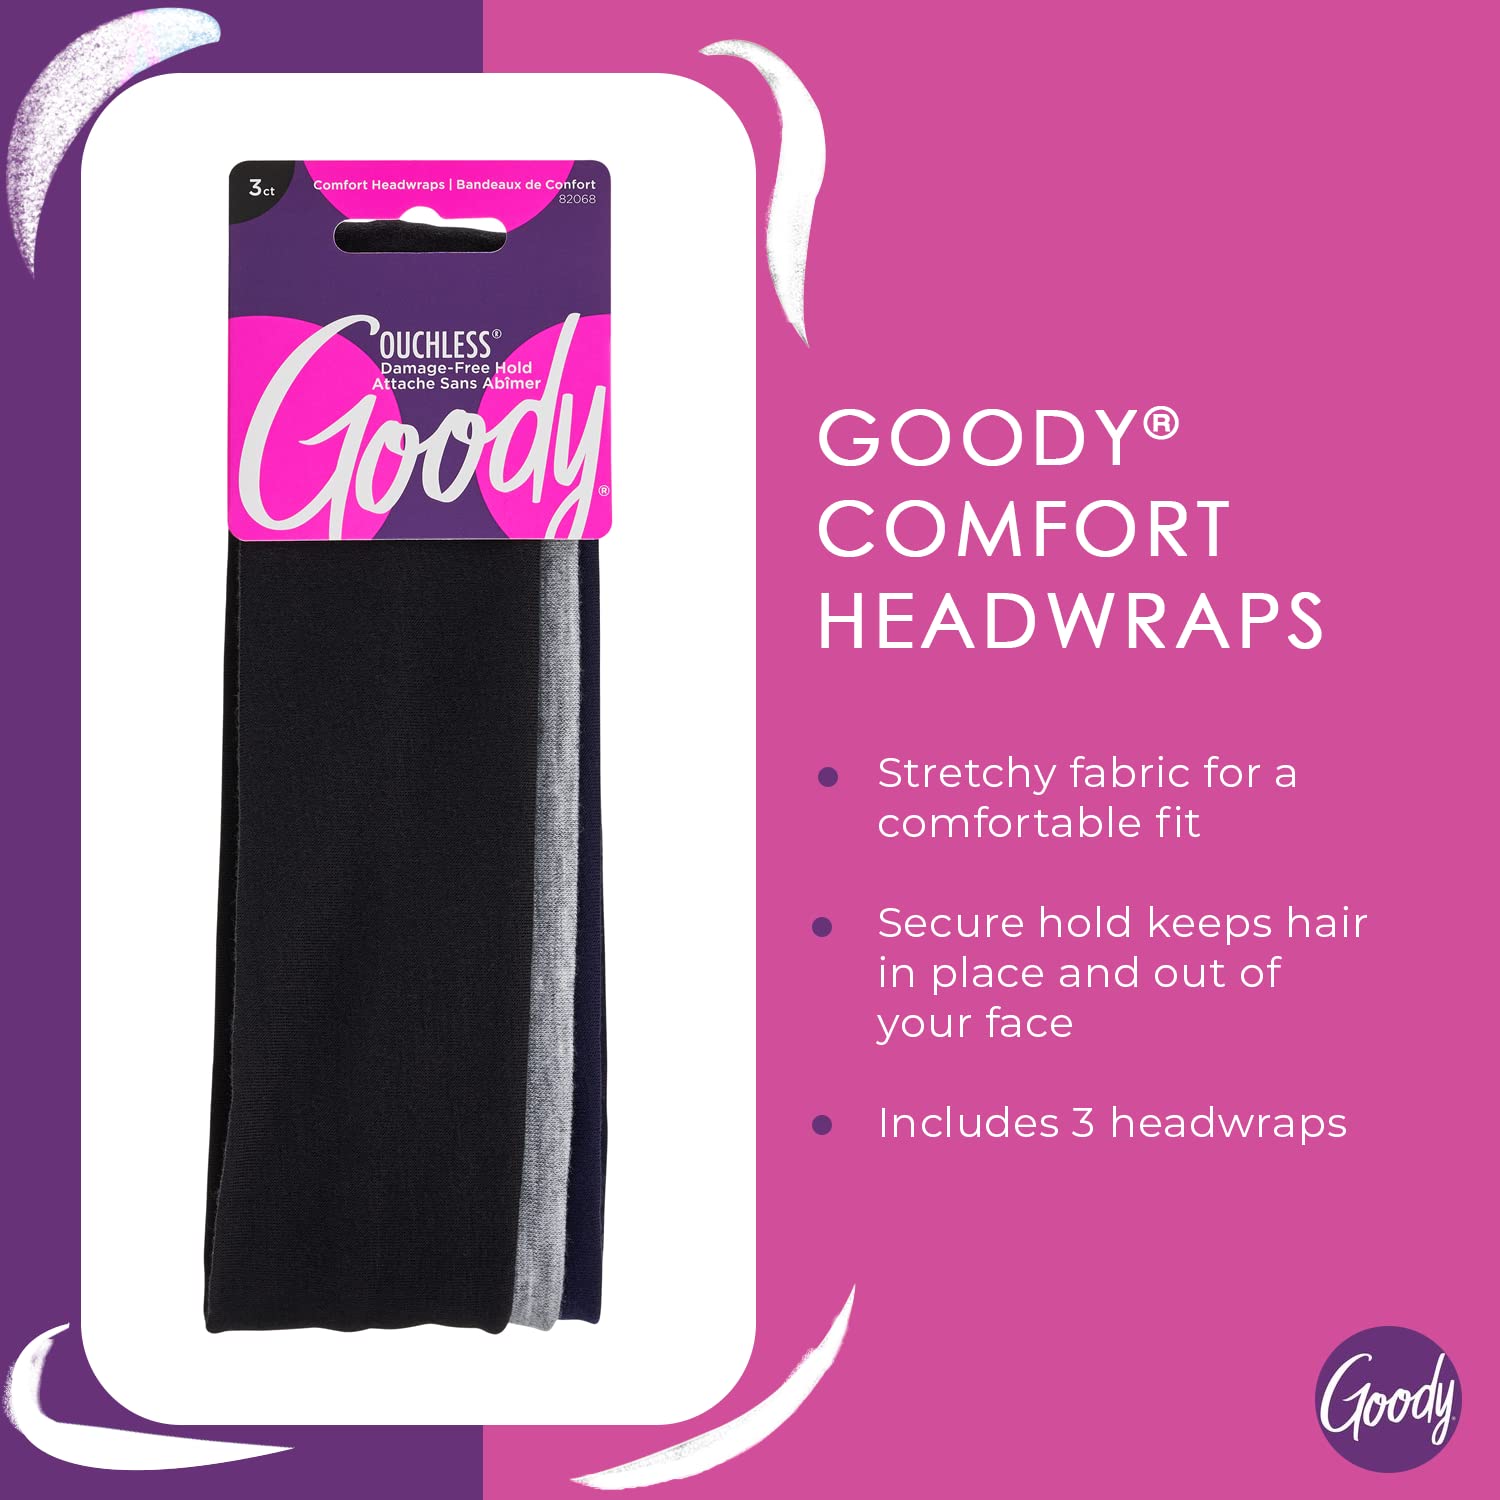 Goody Ouchless Comfort Headwraps - 3 Count(Pack of 1), Assorted - Made from Fabric that is Soft and Strong for a Comfortable Fit - for All Hair Types - Pain-Free Hair Accessories for Women and Girls